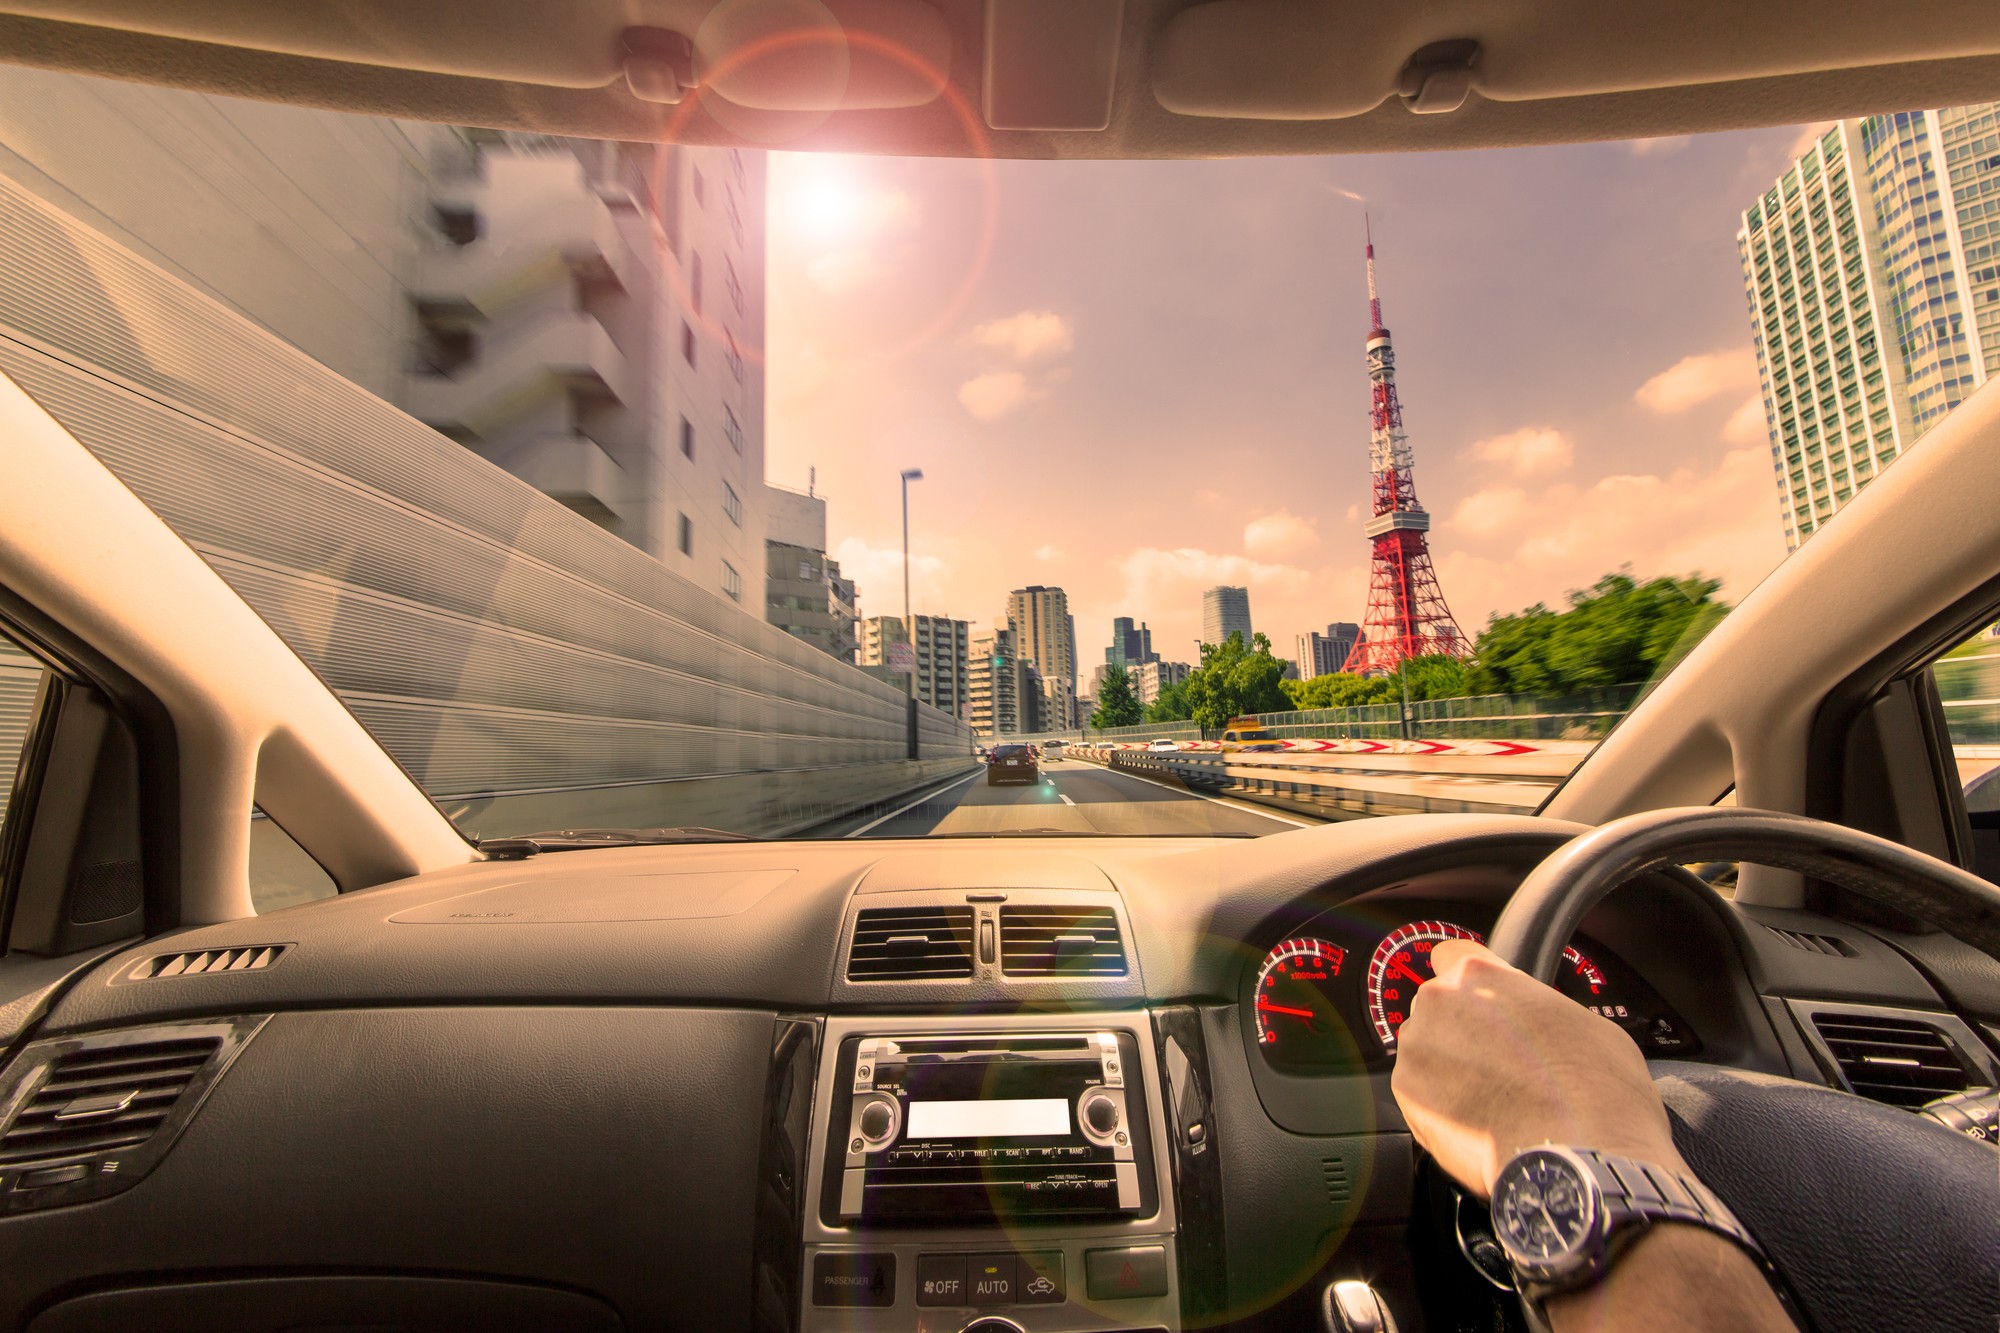 ■After all it is a professional! How to acquire the driving skills that you think?